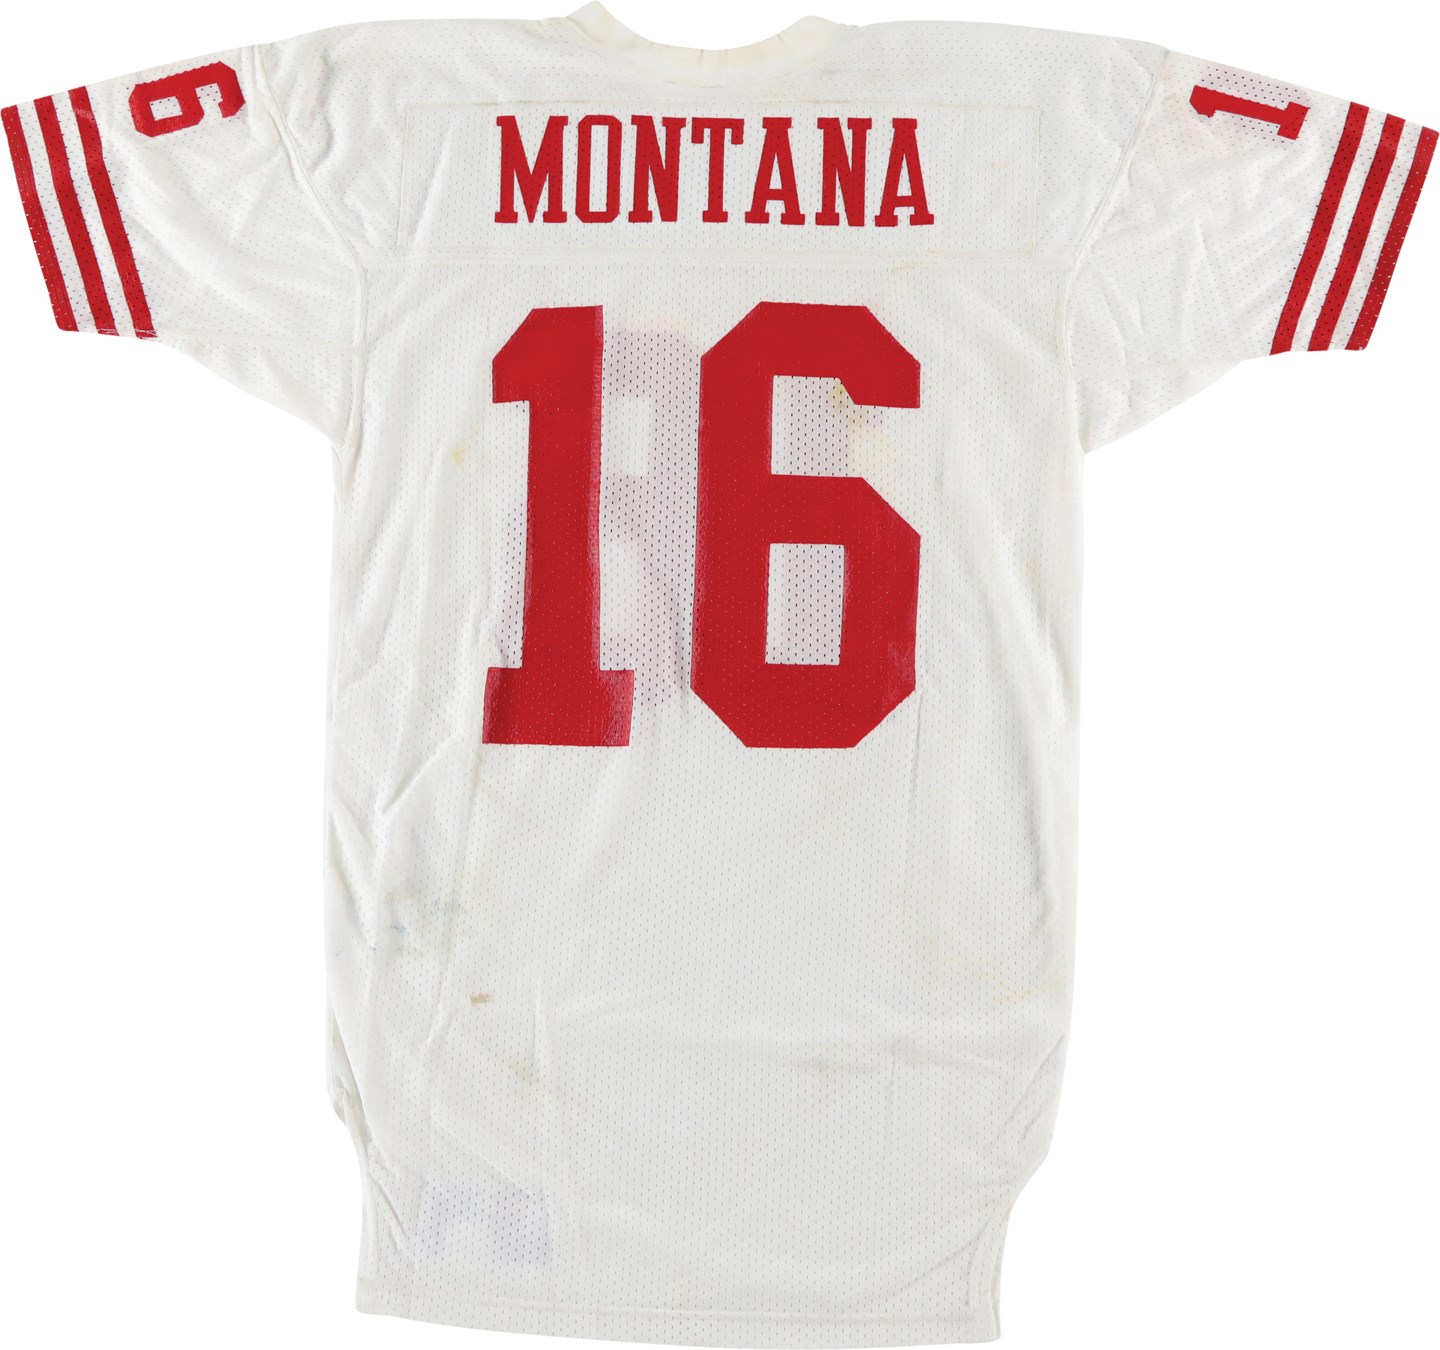 Football - storic 12/11/89 Joe Montana Record-Breaking San Francisco 49ers vs. Rams MNF Signed Game Worn Jersey - Montana Throws TWO 90+ Touchdowns & Second Highest Passing Yards Game of His Career (Sports Investors Photo-Matched LOA & Family Sourced)